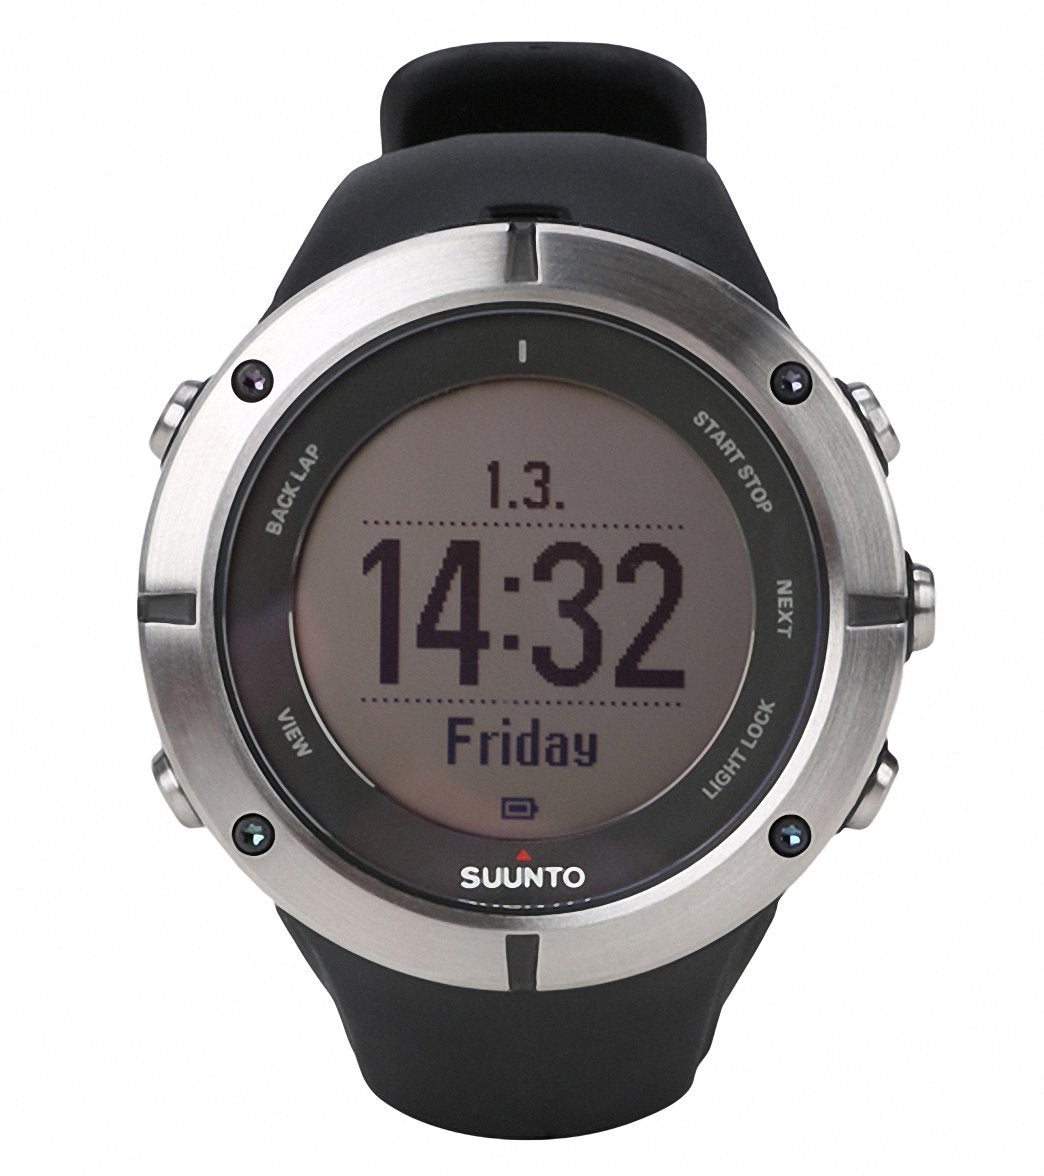 Ambit 2 Sapphire HR - Multisport GPS Watch with Heart Rate Monitor at SwimOutlet.com